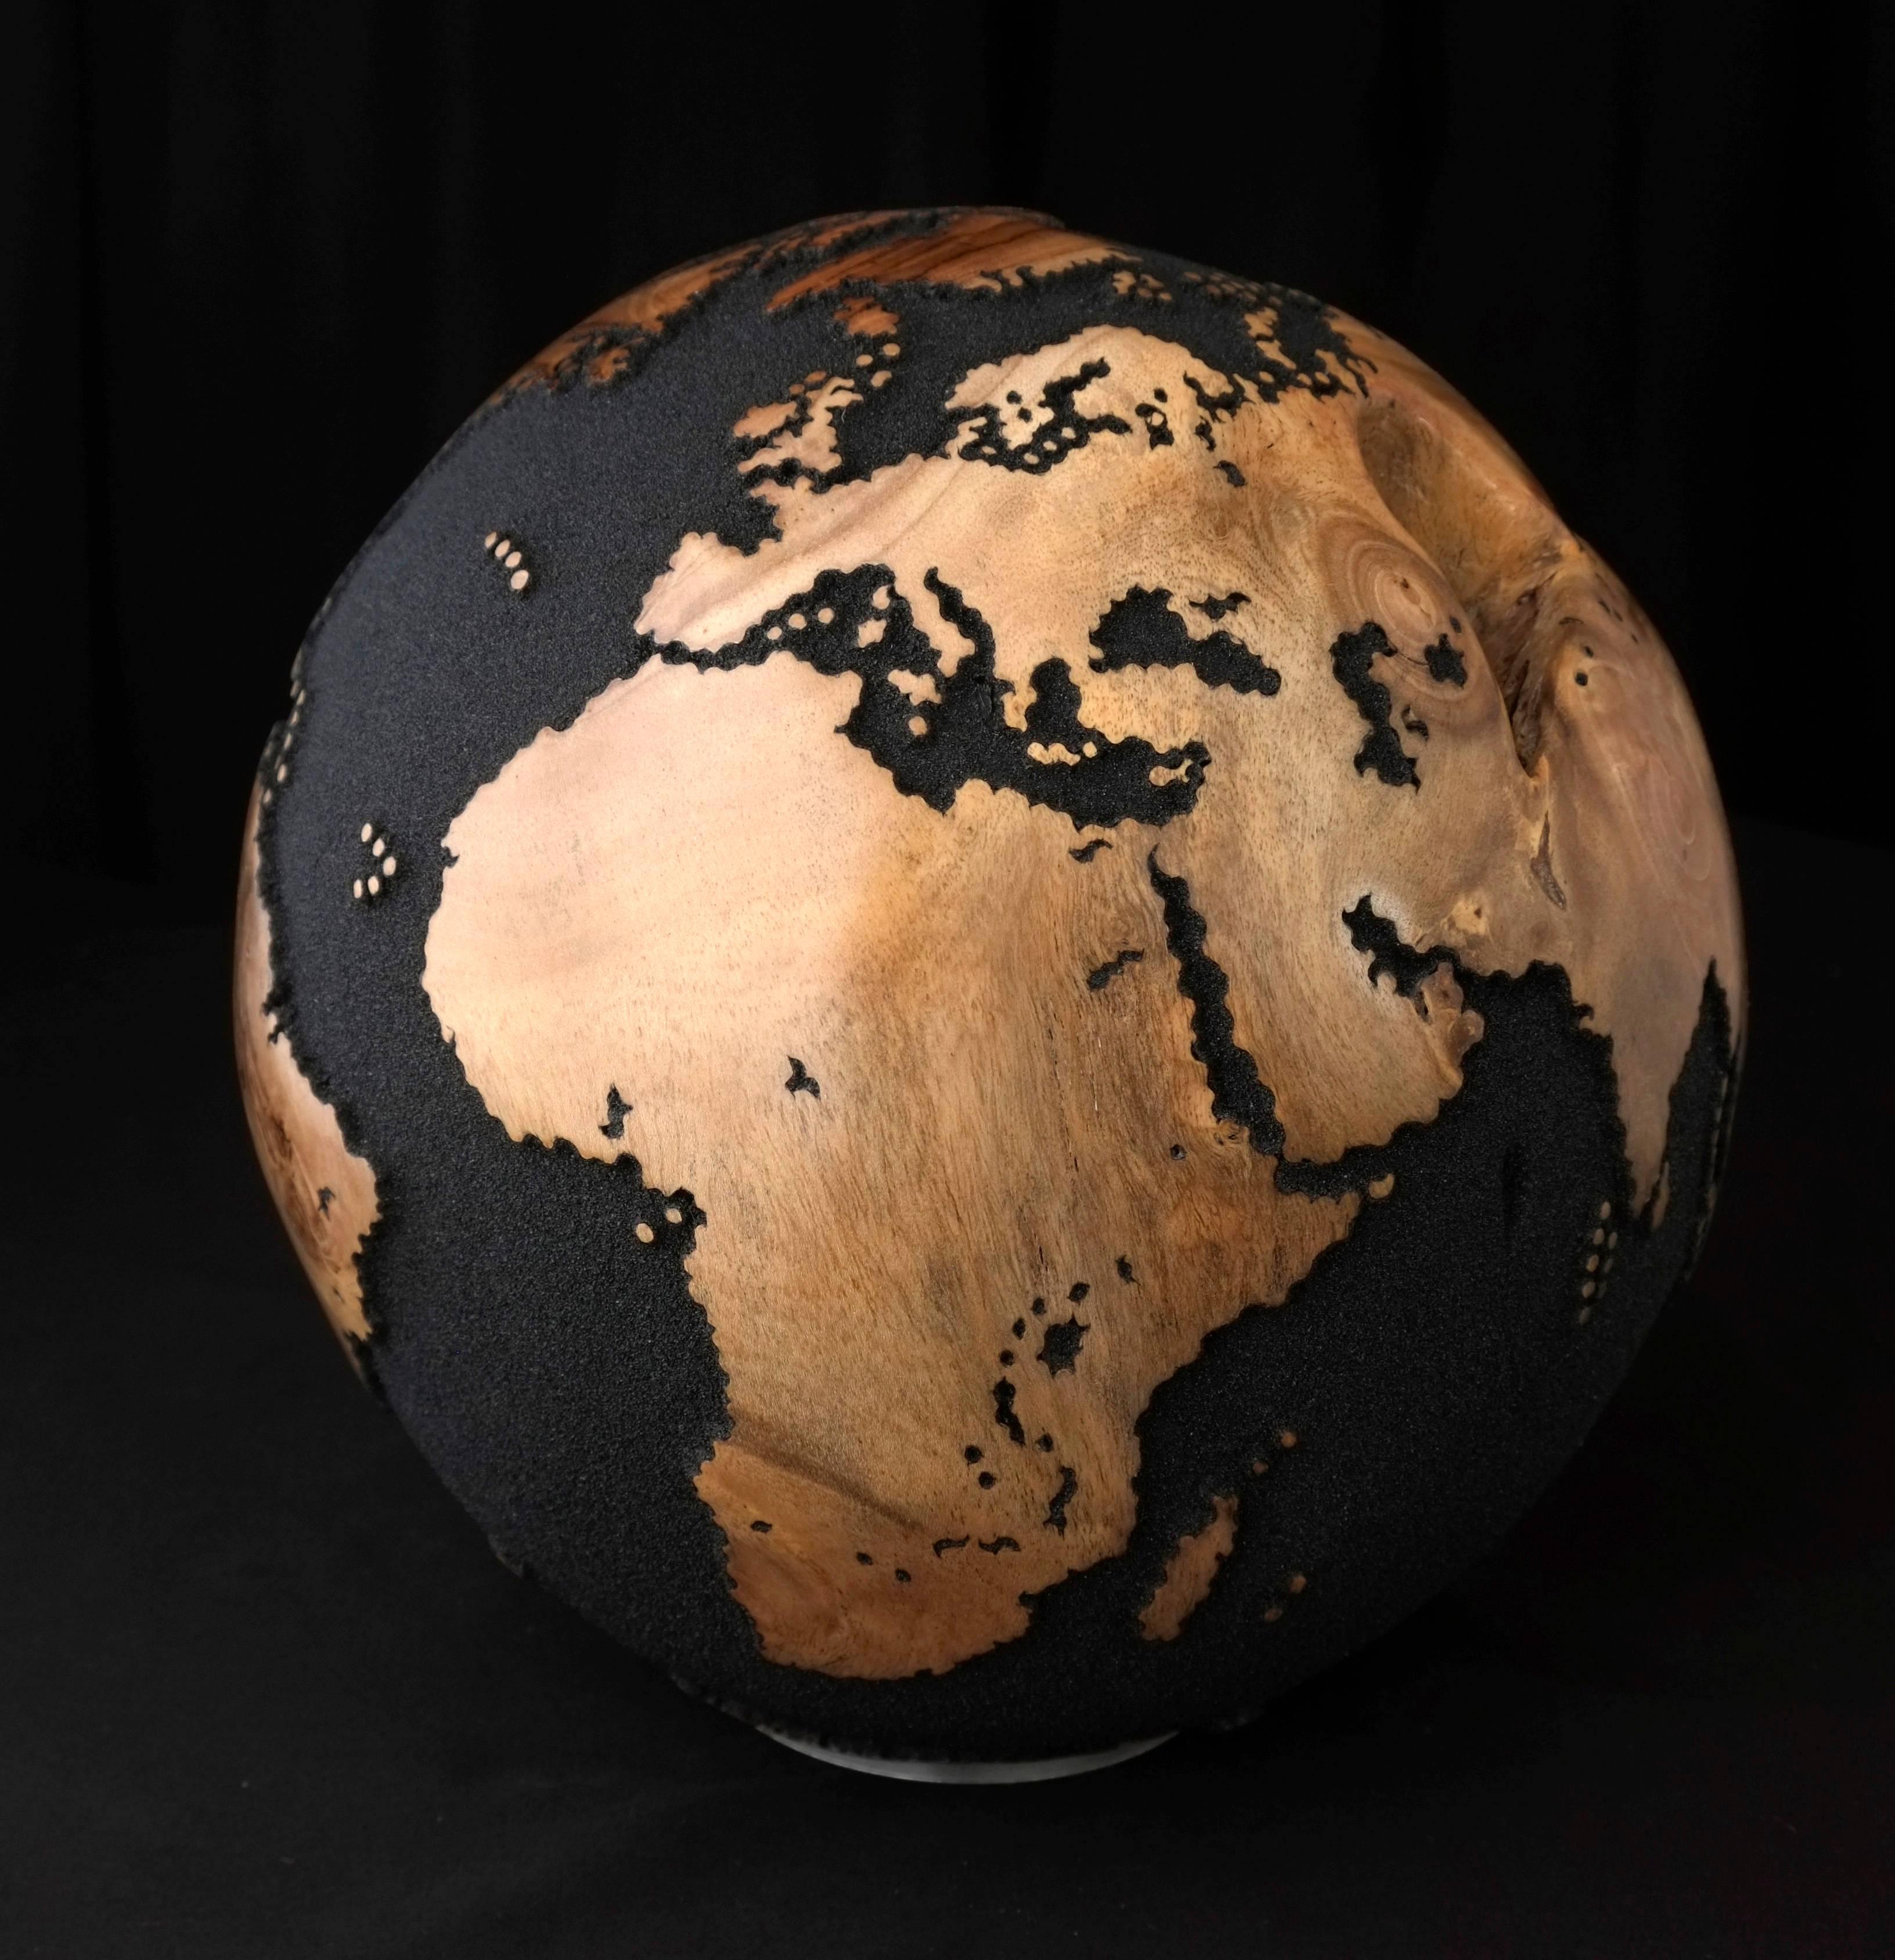 Contemporary map art by HB Globes
From our Classic series, hand-carved wooden globe made of teak root with volcanic sand finishing.
Unique item of decor with naturally occuring twist and intertwine wood patterns on the continent